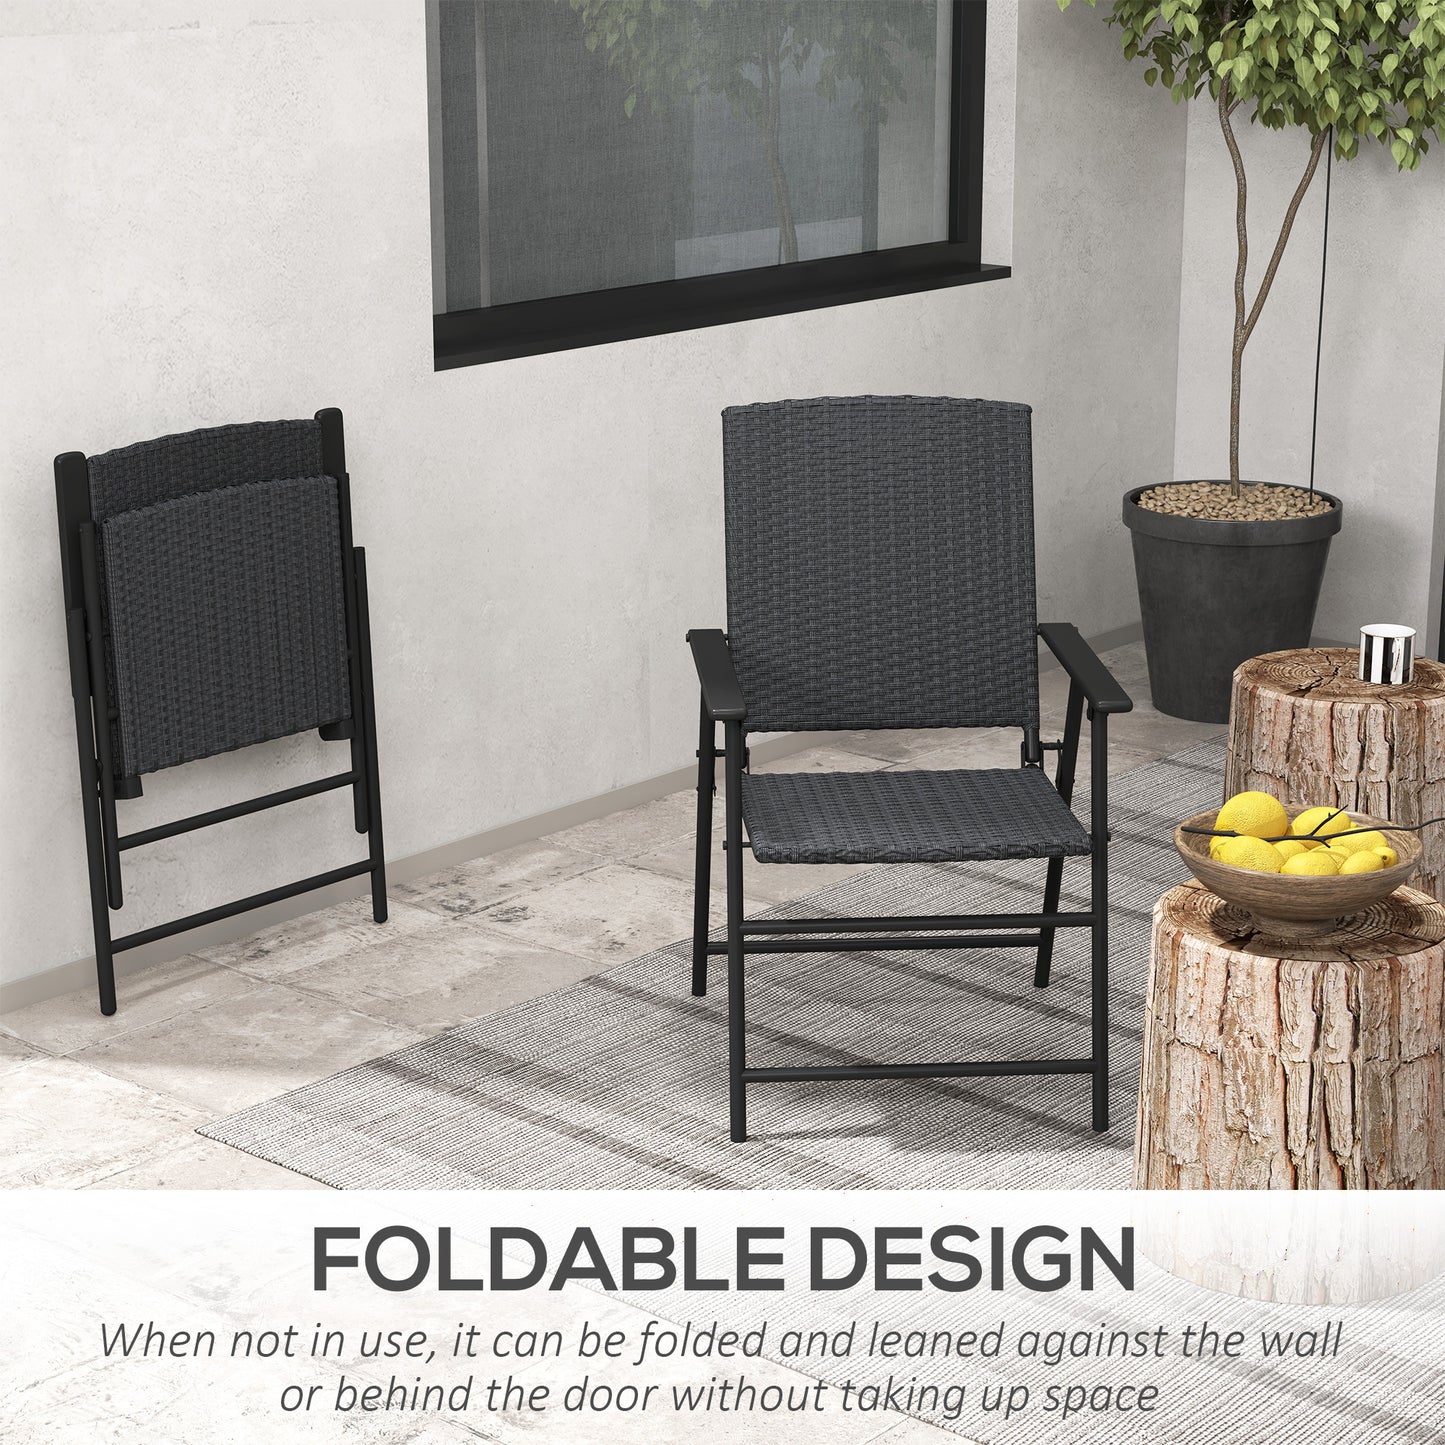 Outdoor Wicker Dining Chair Set of 2 with Steel Frame Black - Gallery Canada